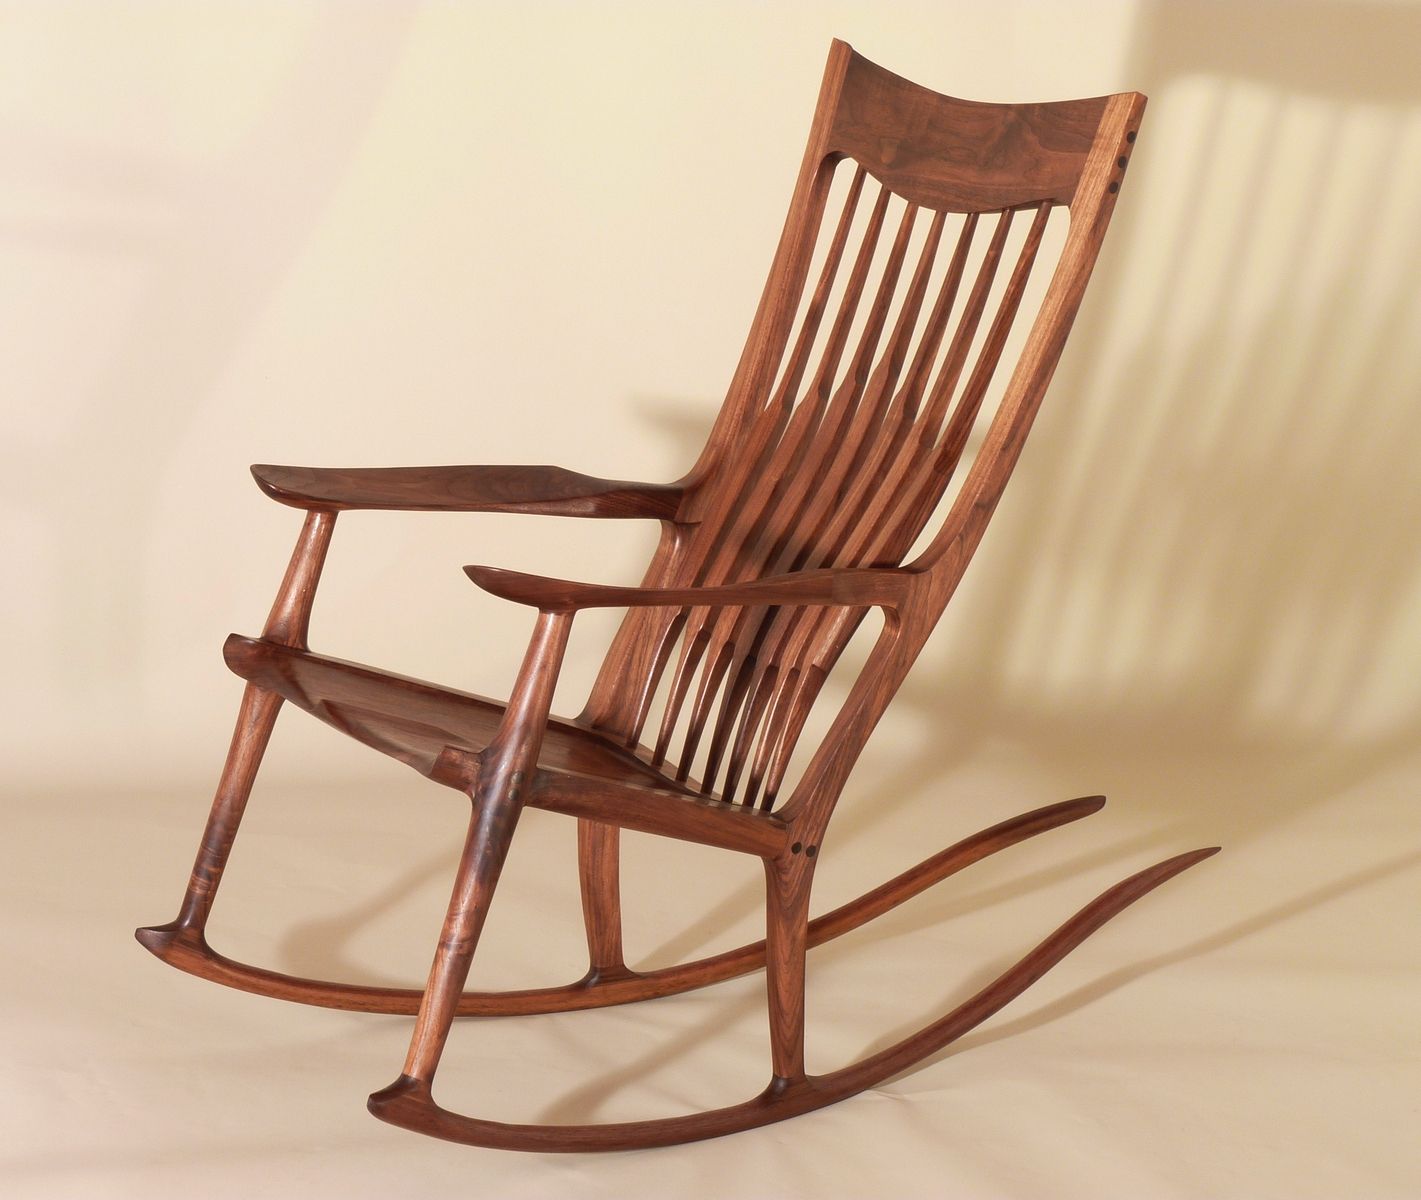 Hand Crafted Sam Maloof Style Rocking Chairs by J. Blok